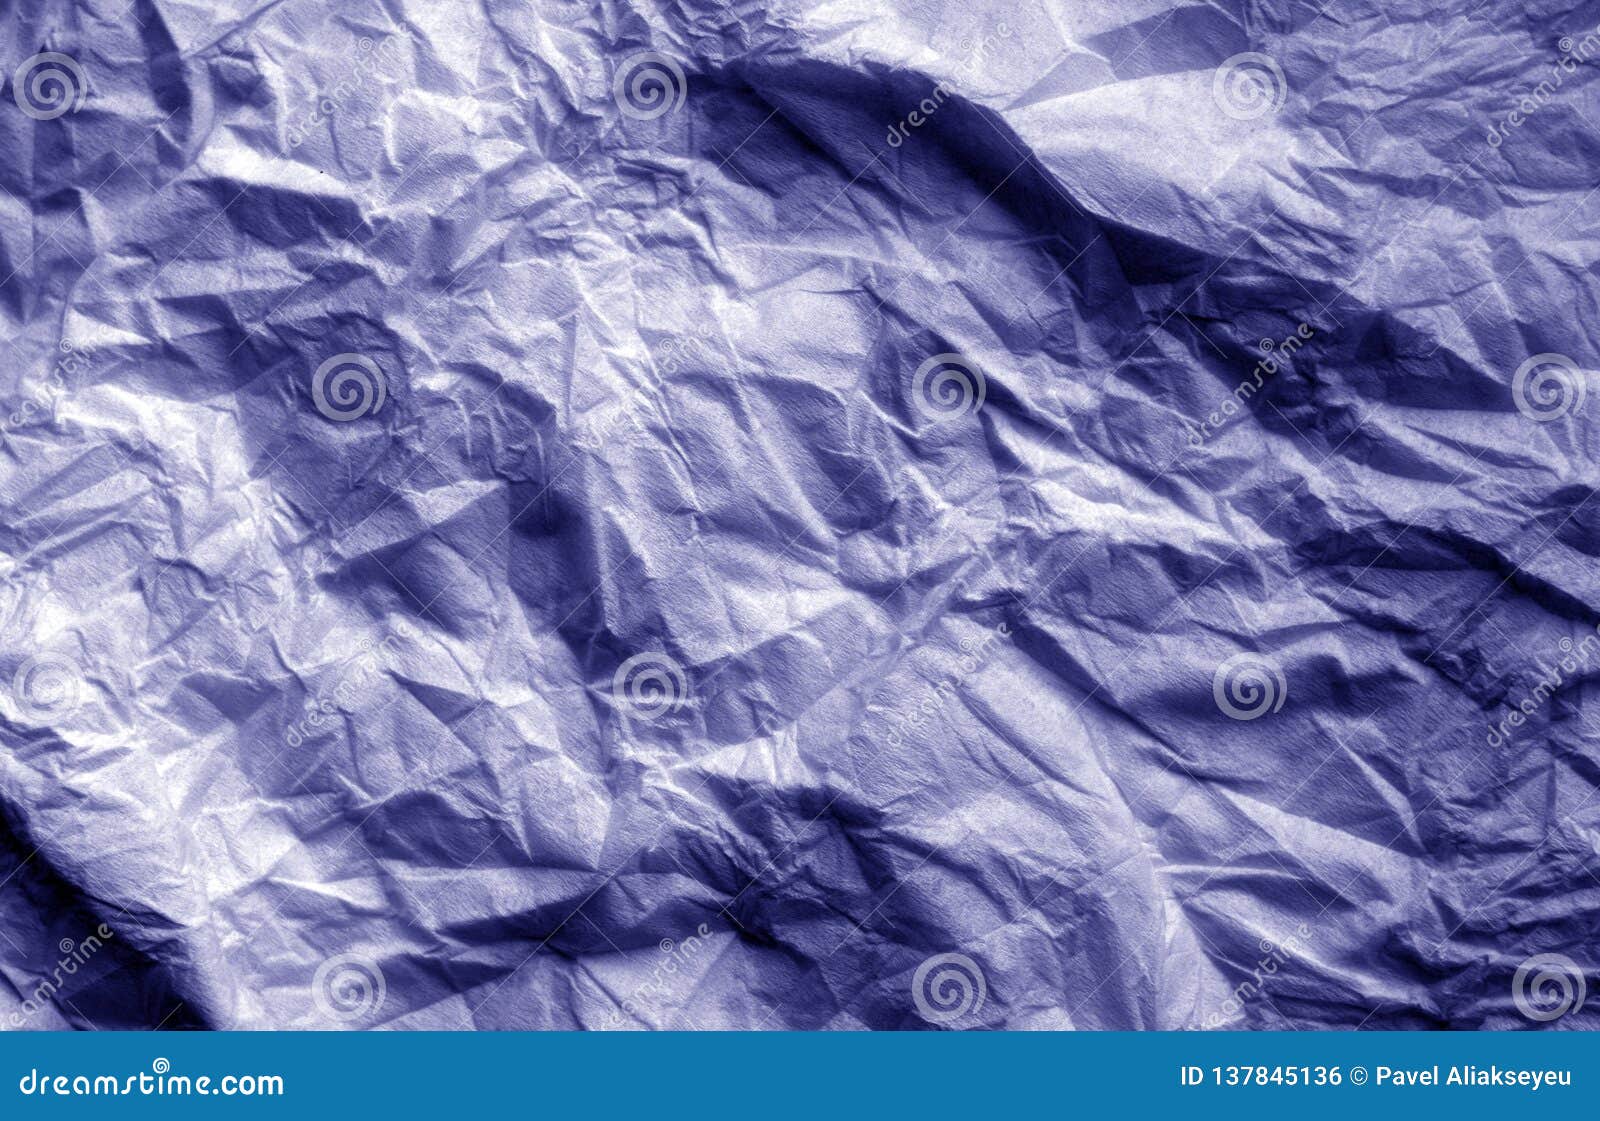 Crumpled Sheet Of Paper In Blue Color Stock Photo Image of journal, aged 137845136